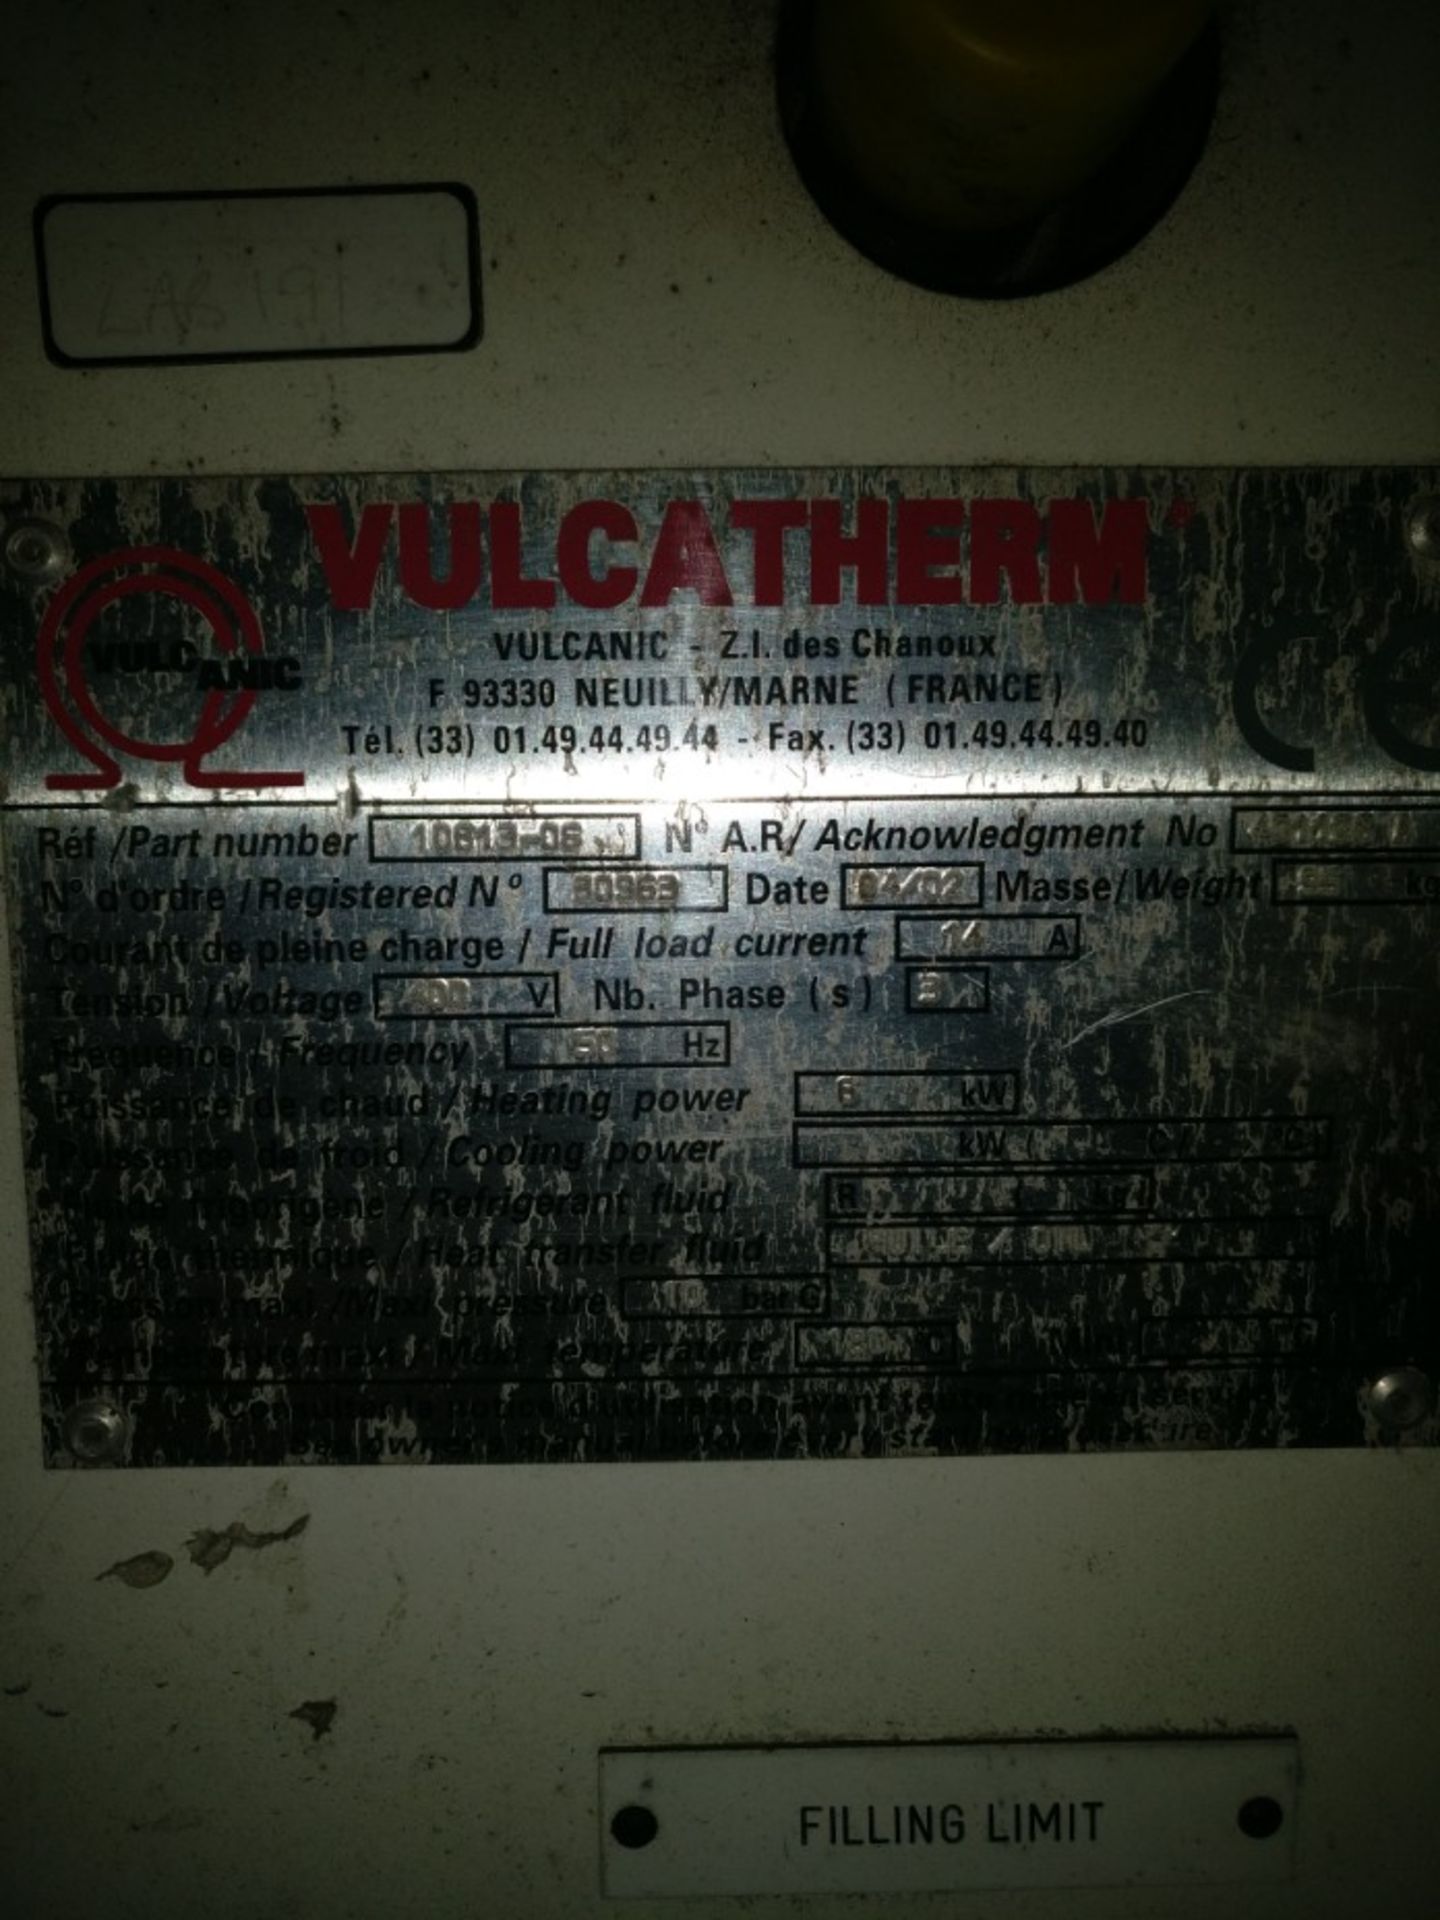 Vulcartherm Electric Thermal Oil Heater, internal - Image 5 of 5